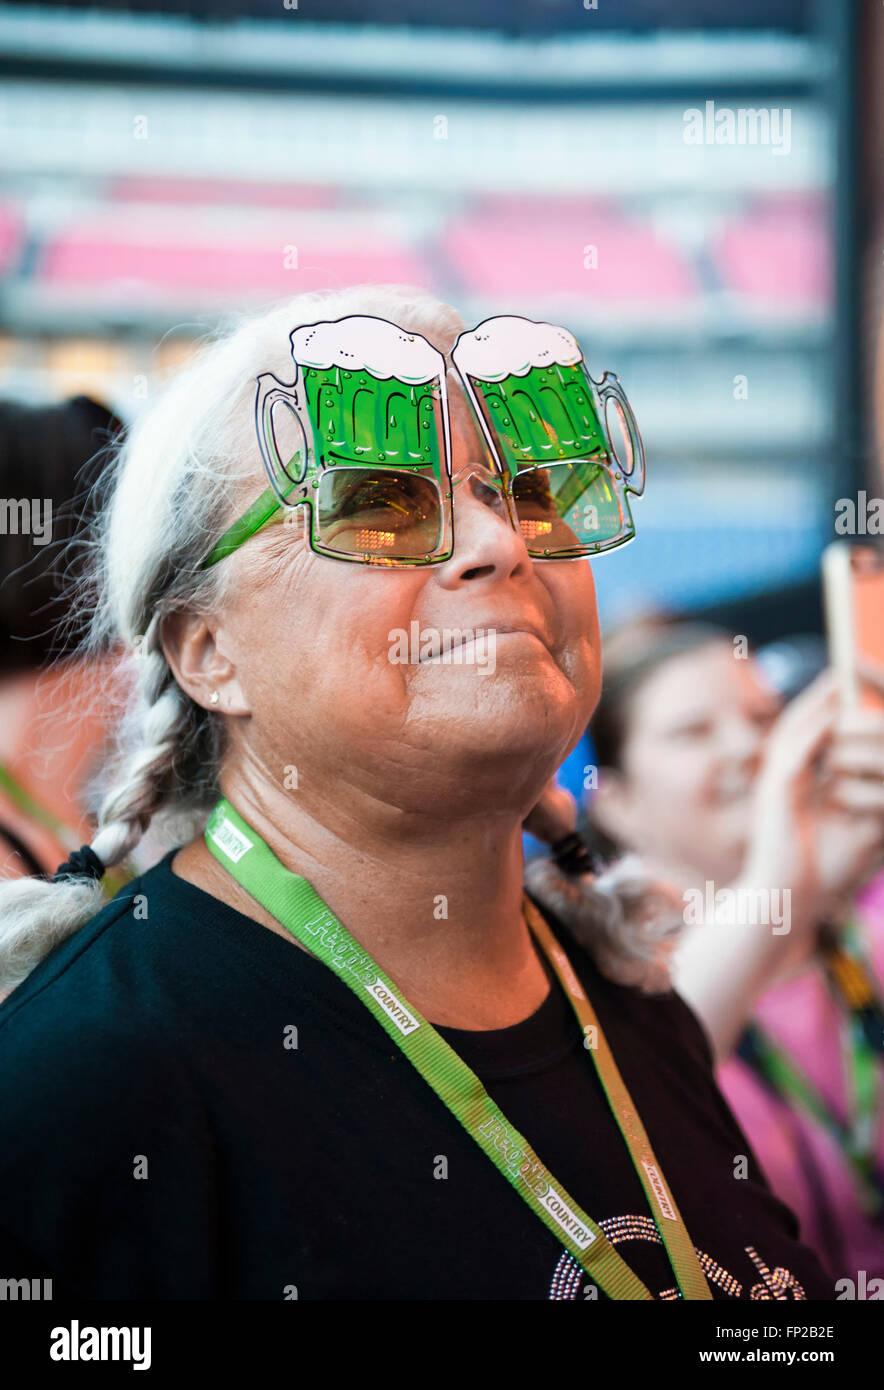 A woman wearing beer glasses (goggles) at the CMA Music Festival in Nashville Tennessee Stock Photo